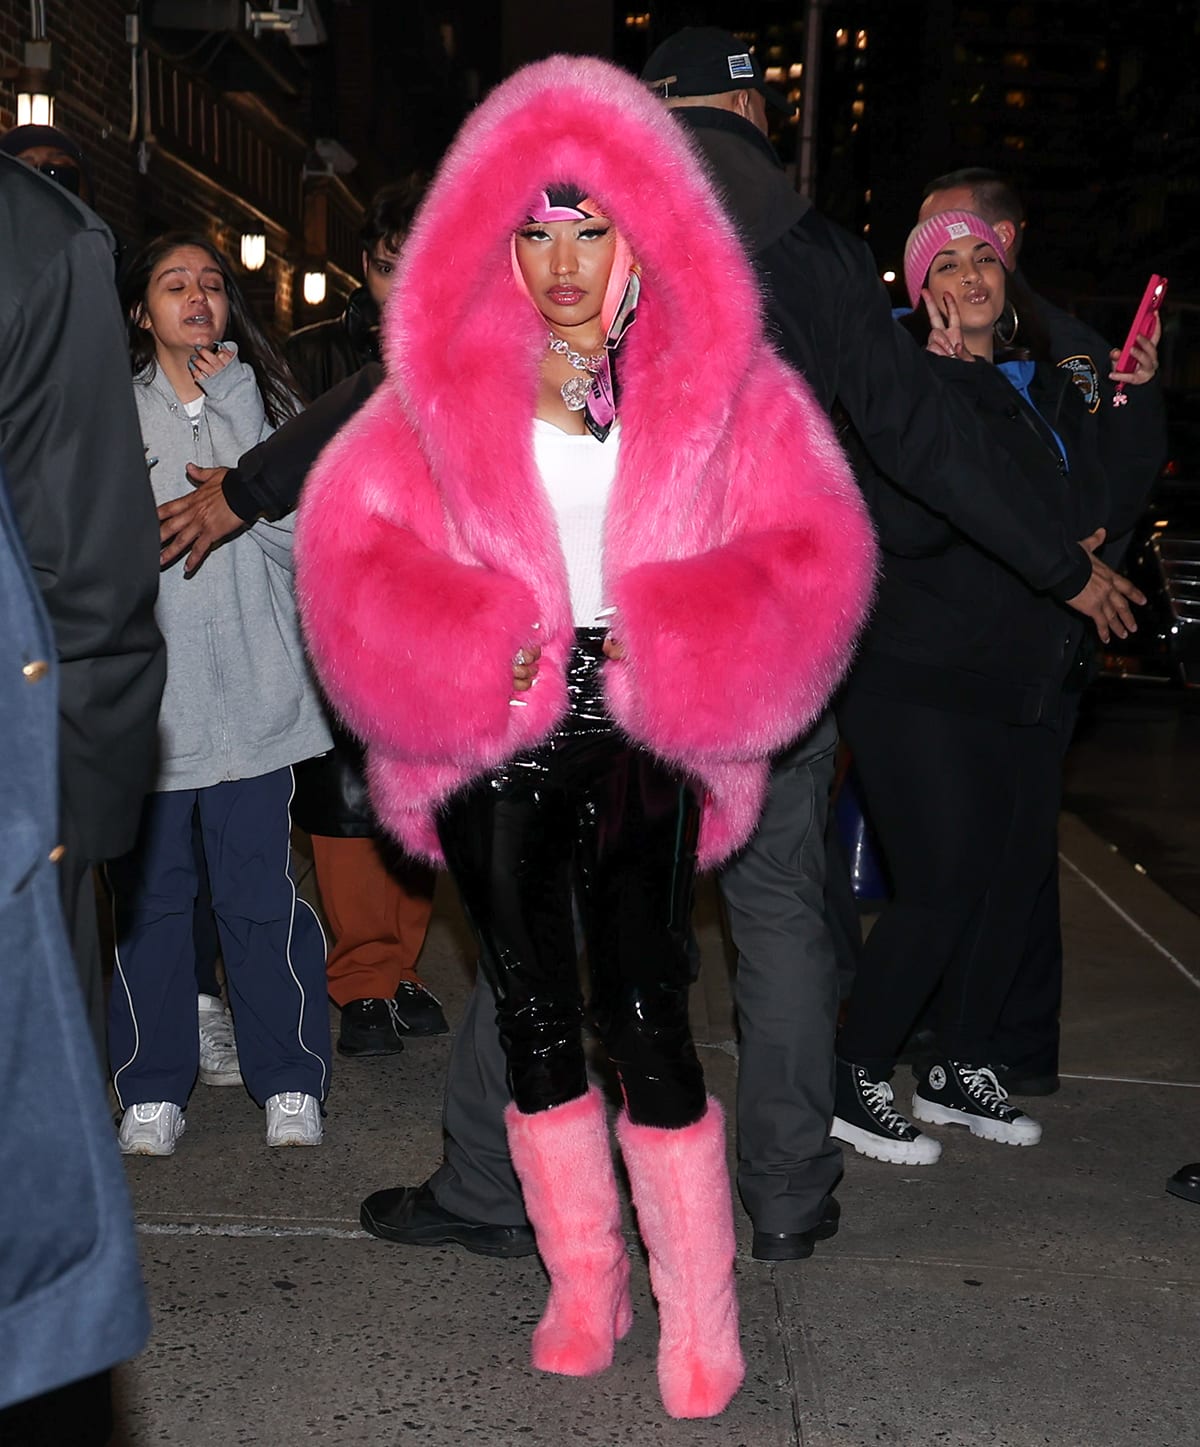 Nicki Minaj promotes her Pink Friday 2 album and upcoming world tour in a fluffy pink coat by Alexandre Vauthier, black latex pants, and pink mink boots at The Late Show With Stephen Colbert in New York City on December 11, 2023